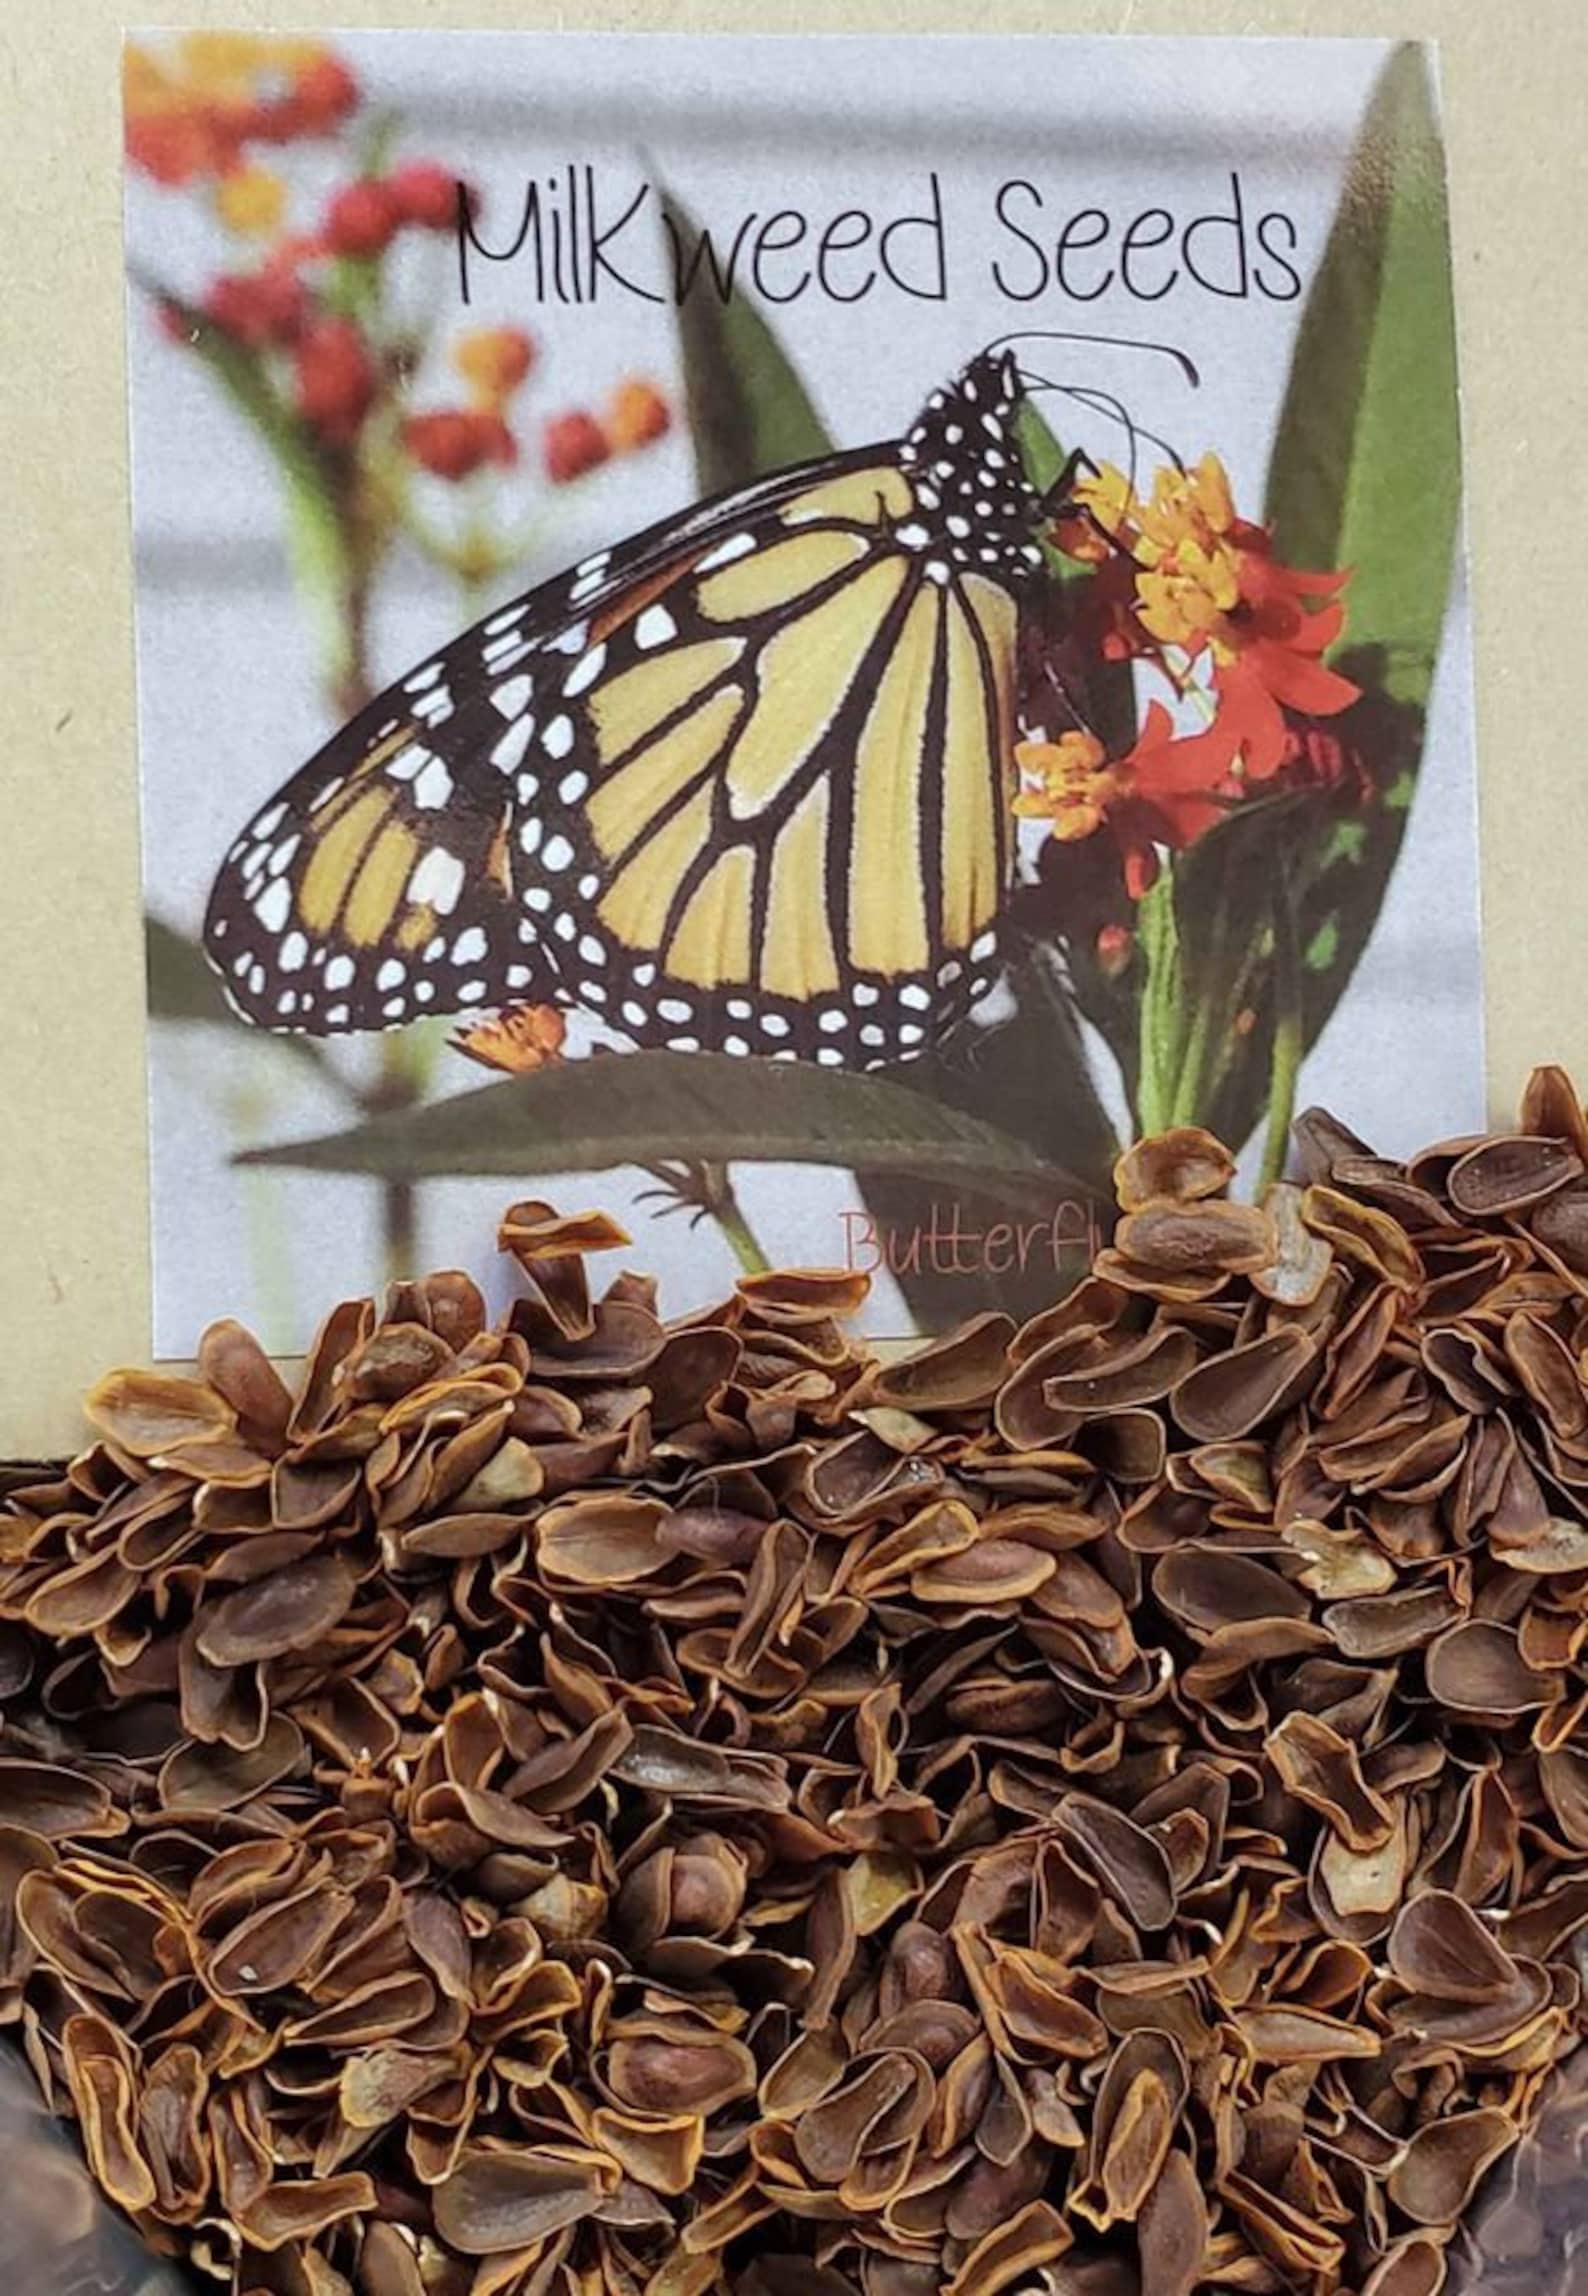 How To Germinate Butterfly Milkweed Seeds